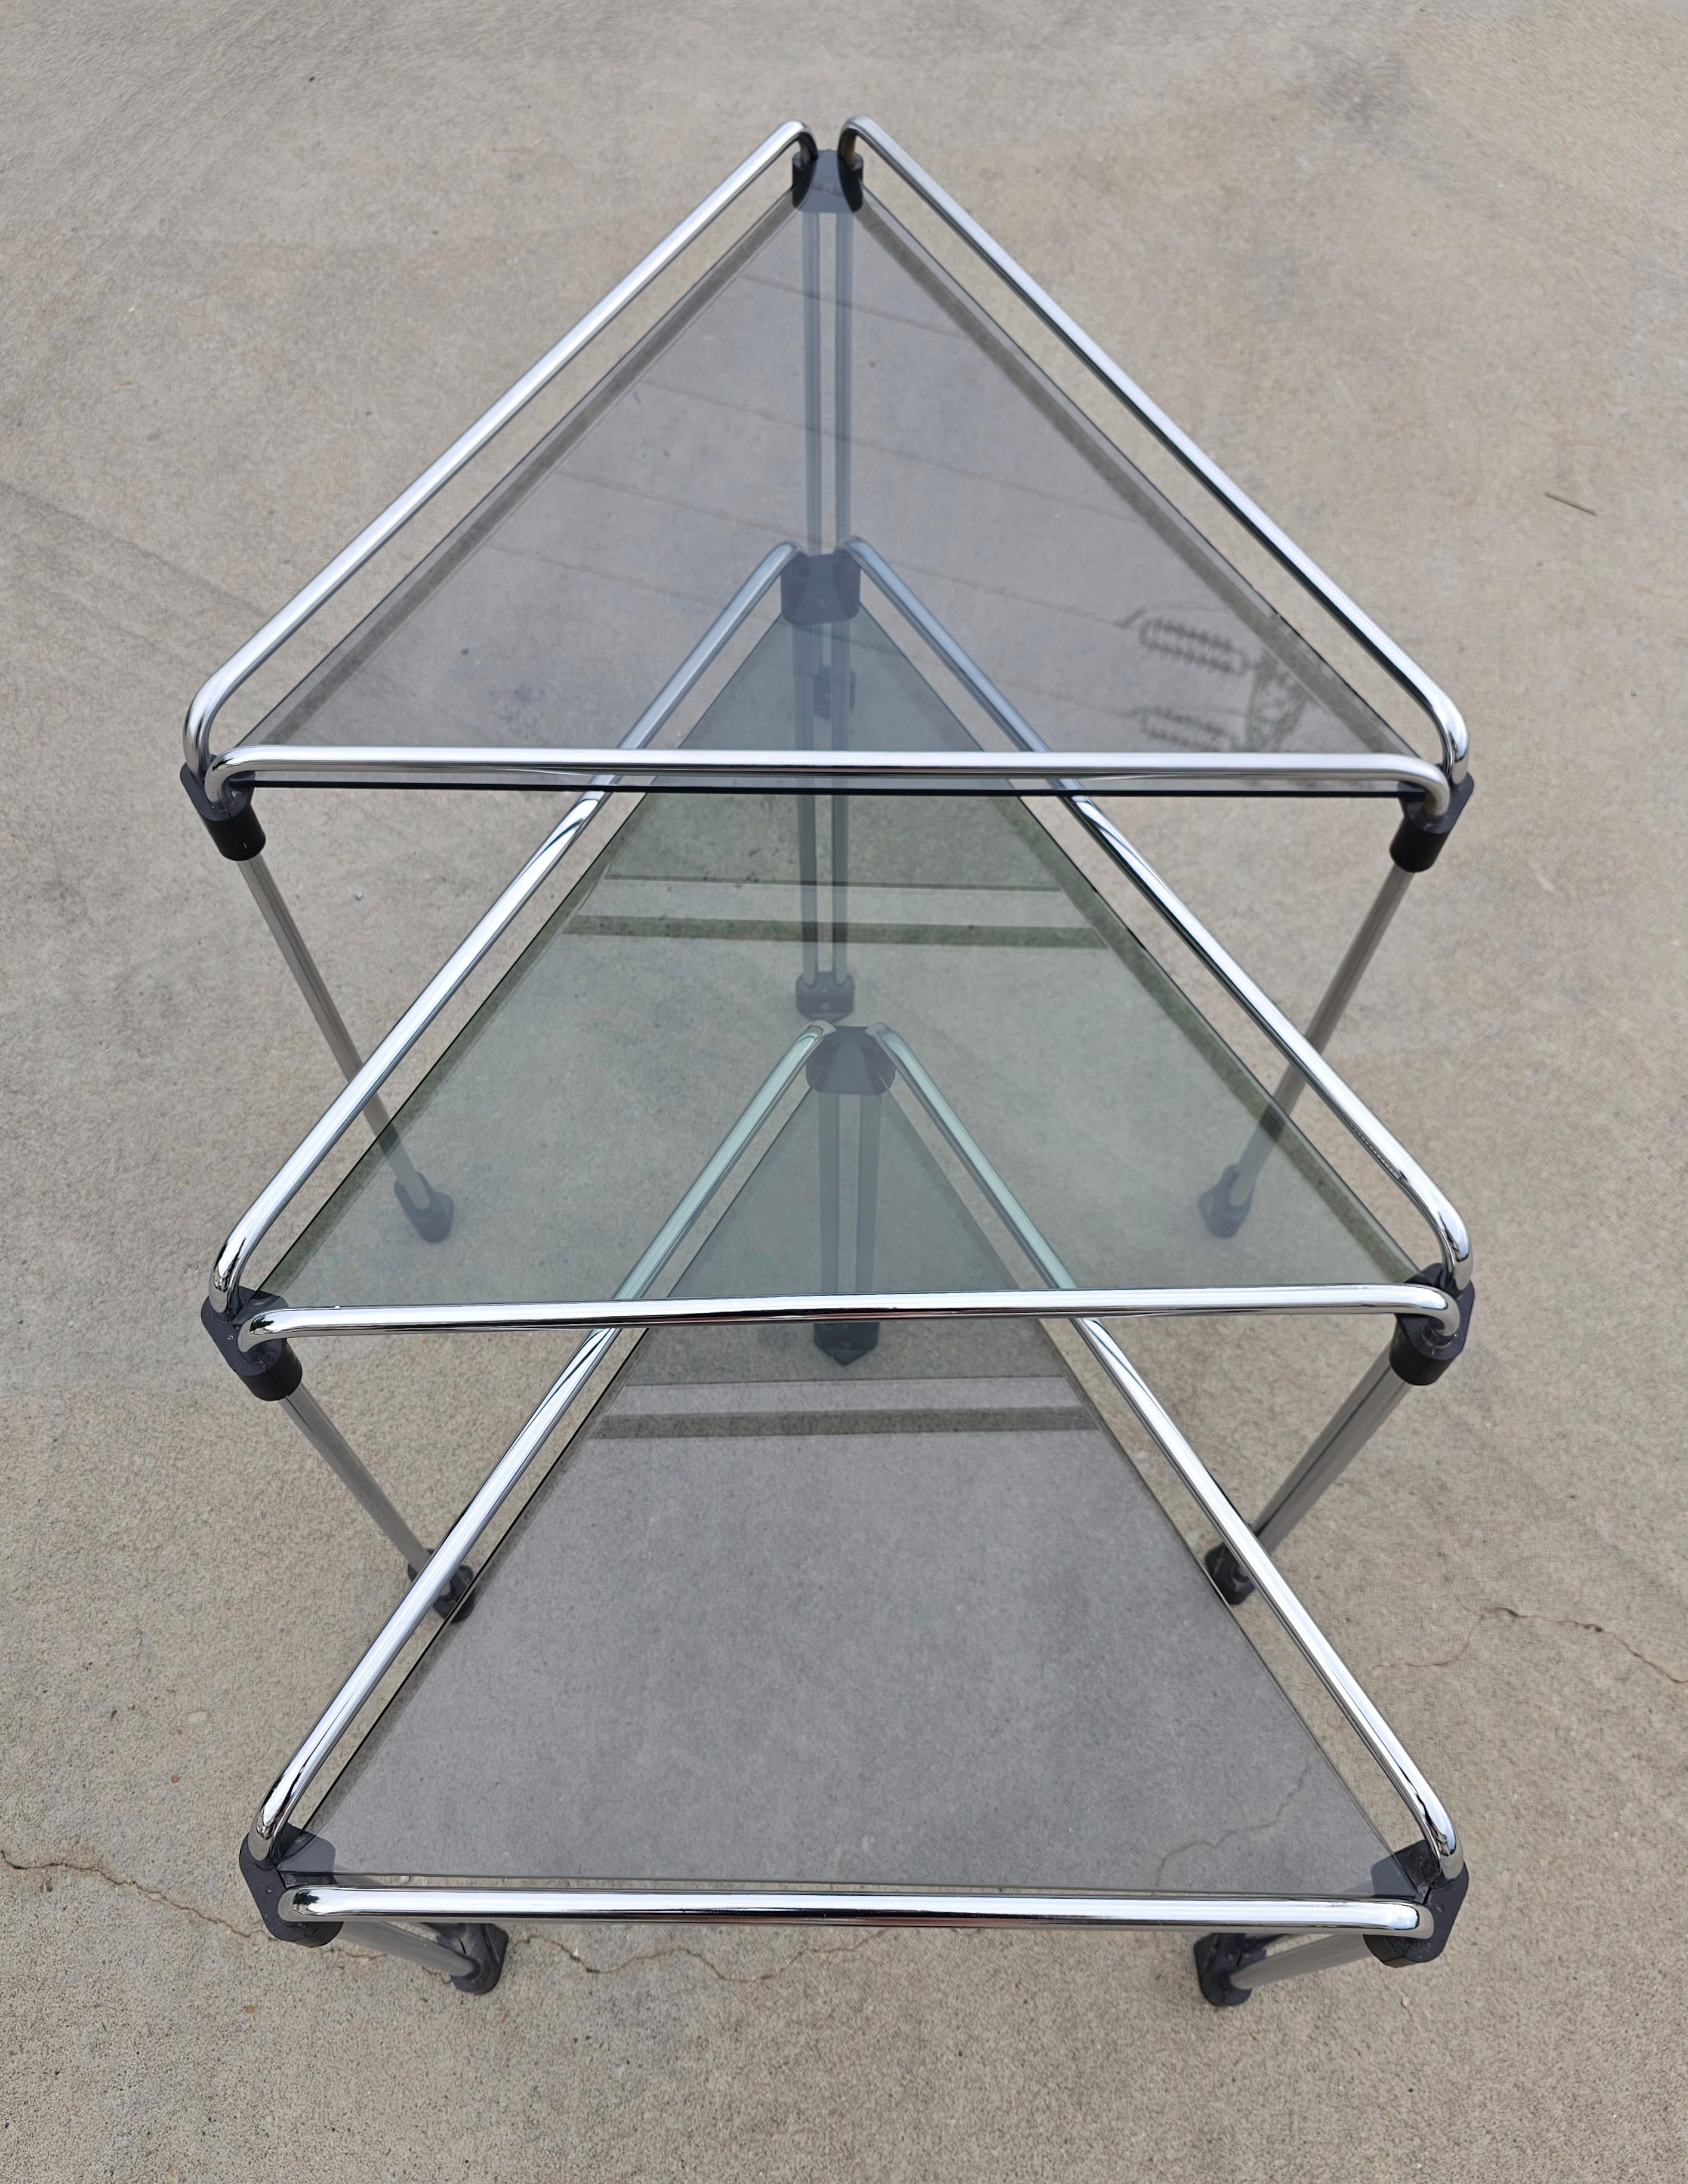 This listing features vintage set of 3 beautiful triangular mid century modern chrome and tinted glass nesting tables done in Bauhaus style. Perfect for small apartments or corner areas in your home and very stylish and elegant. 

Italian sleek